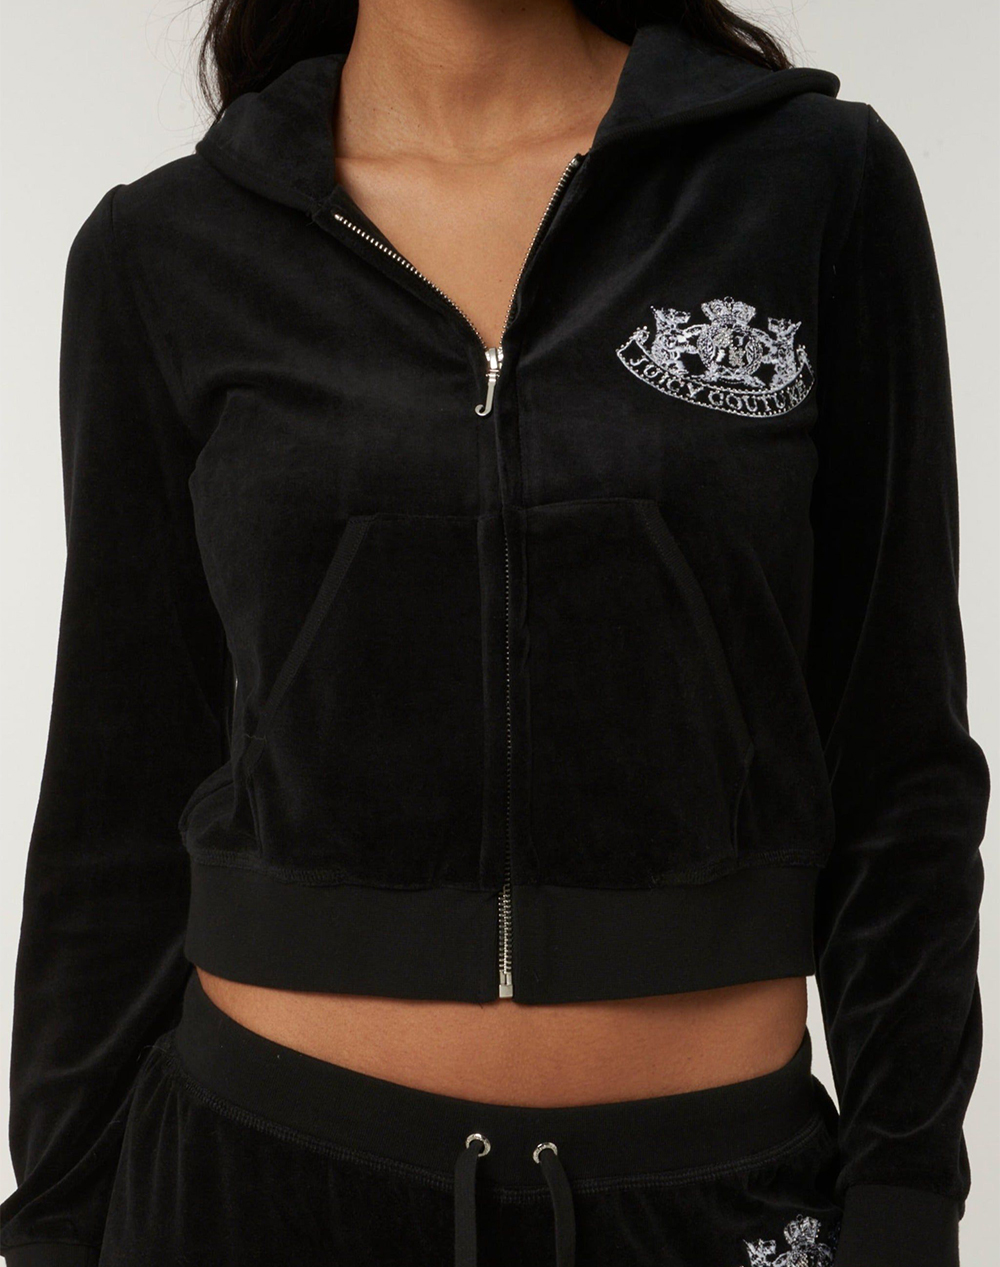 JUICY COUTURE HERITAGE DOG CREST ROBYN HOODIE JCBAS223813-101 Black